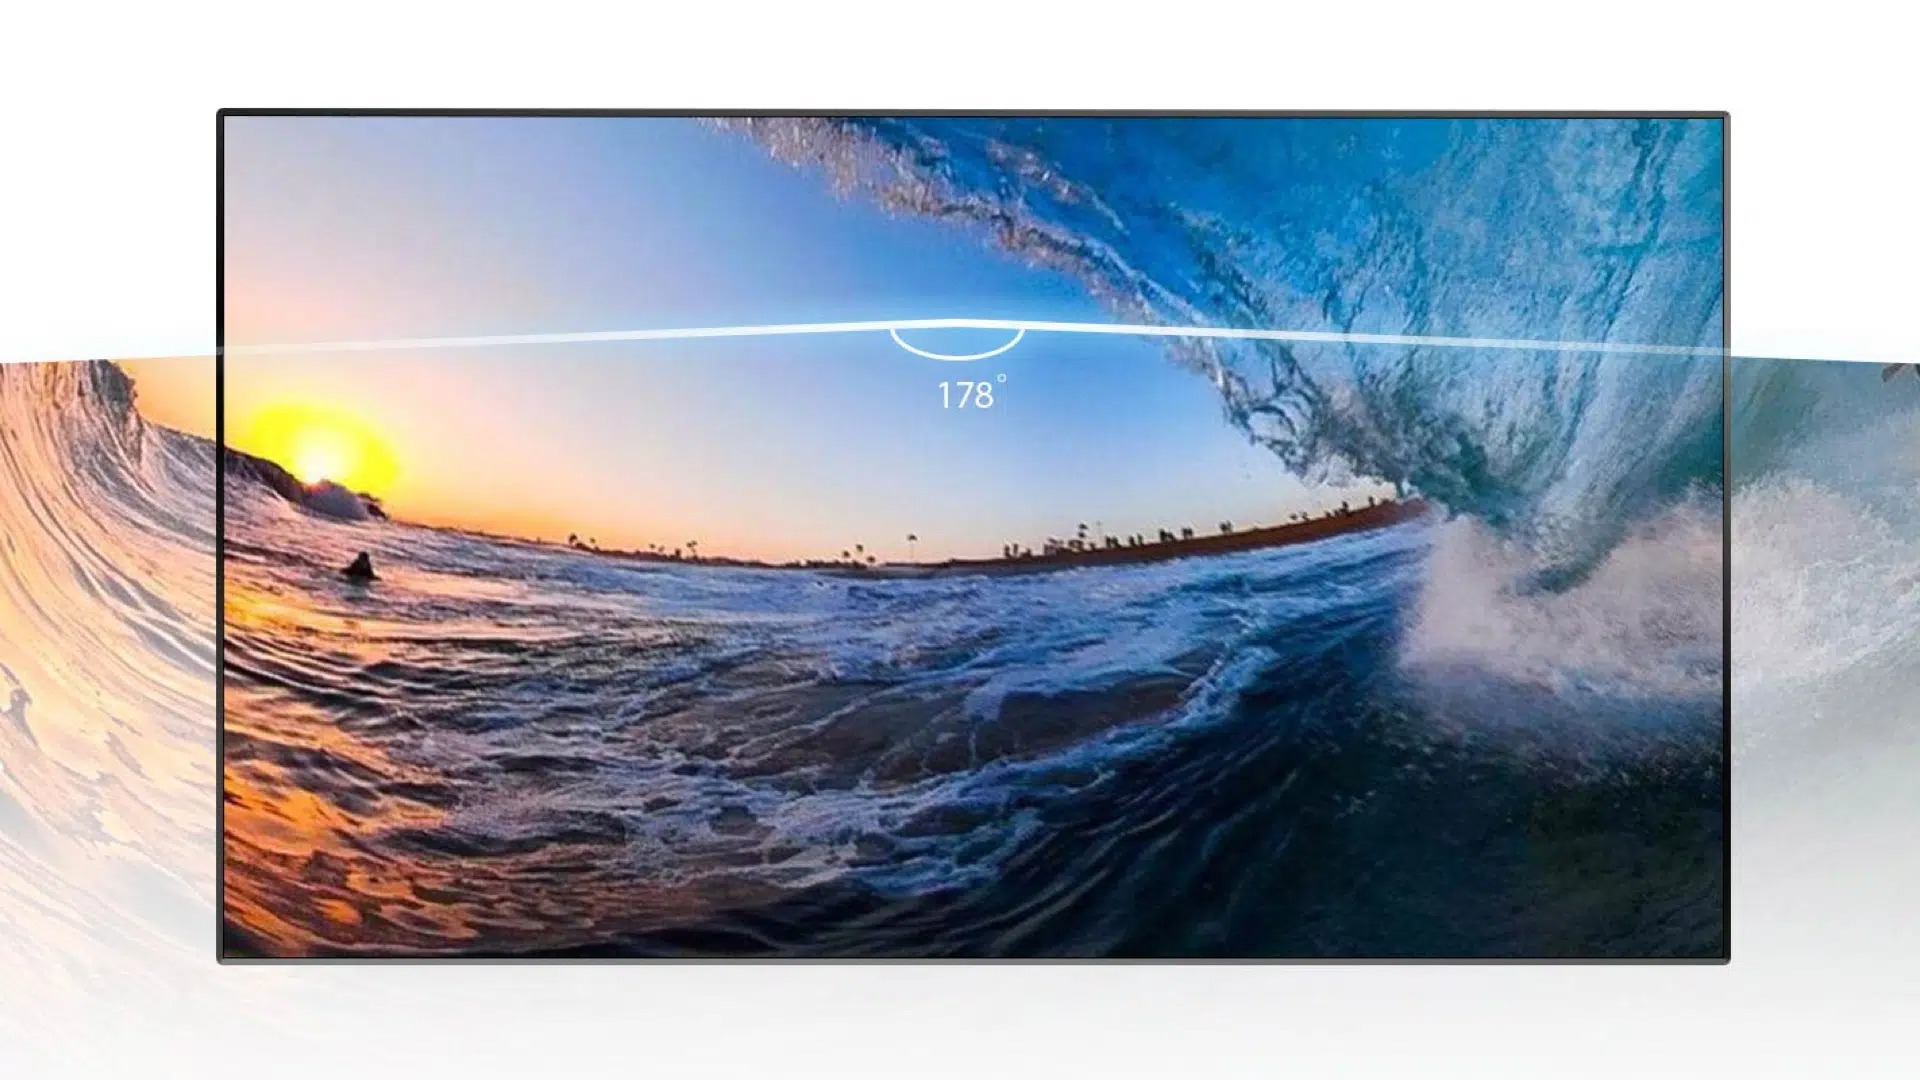 TCL 43S5200 | 43 Inches Full HD